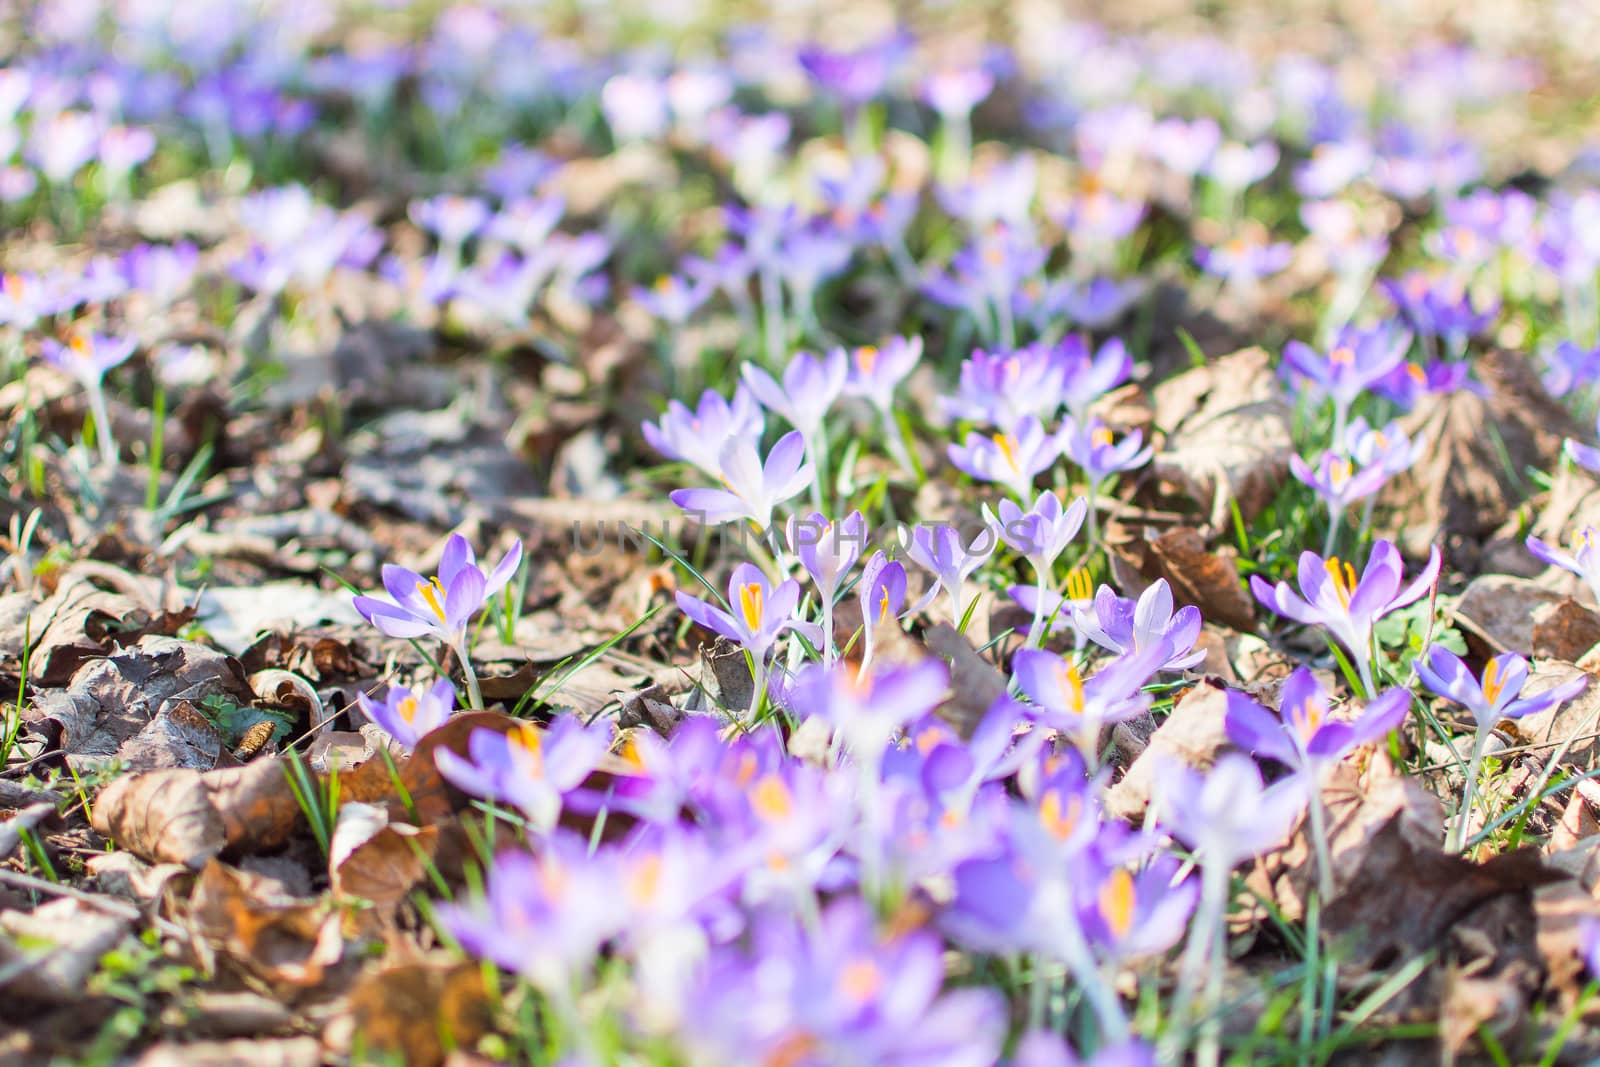 Spring blooming crocus flowers over dry foliage on the lawn